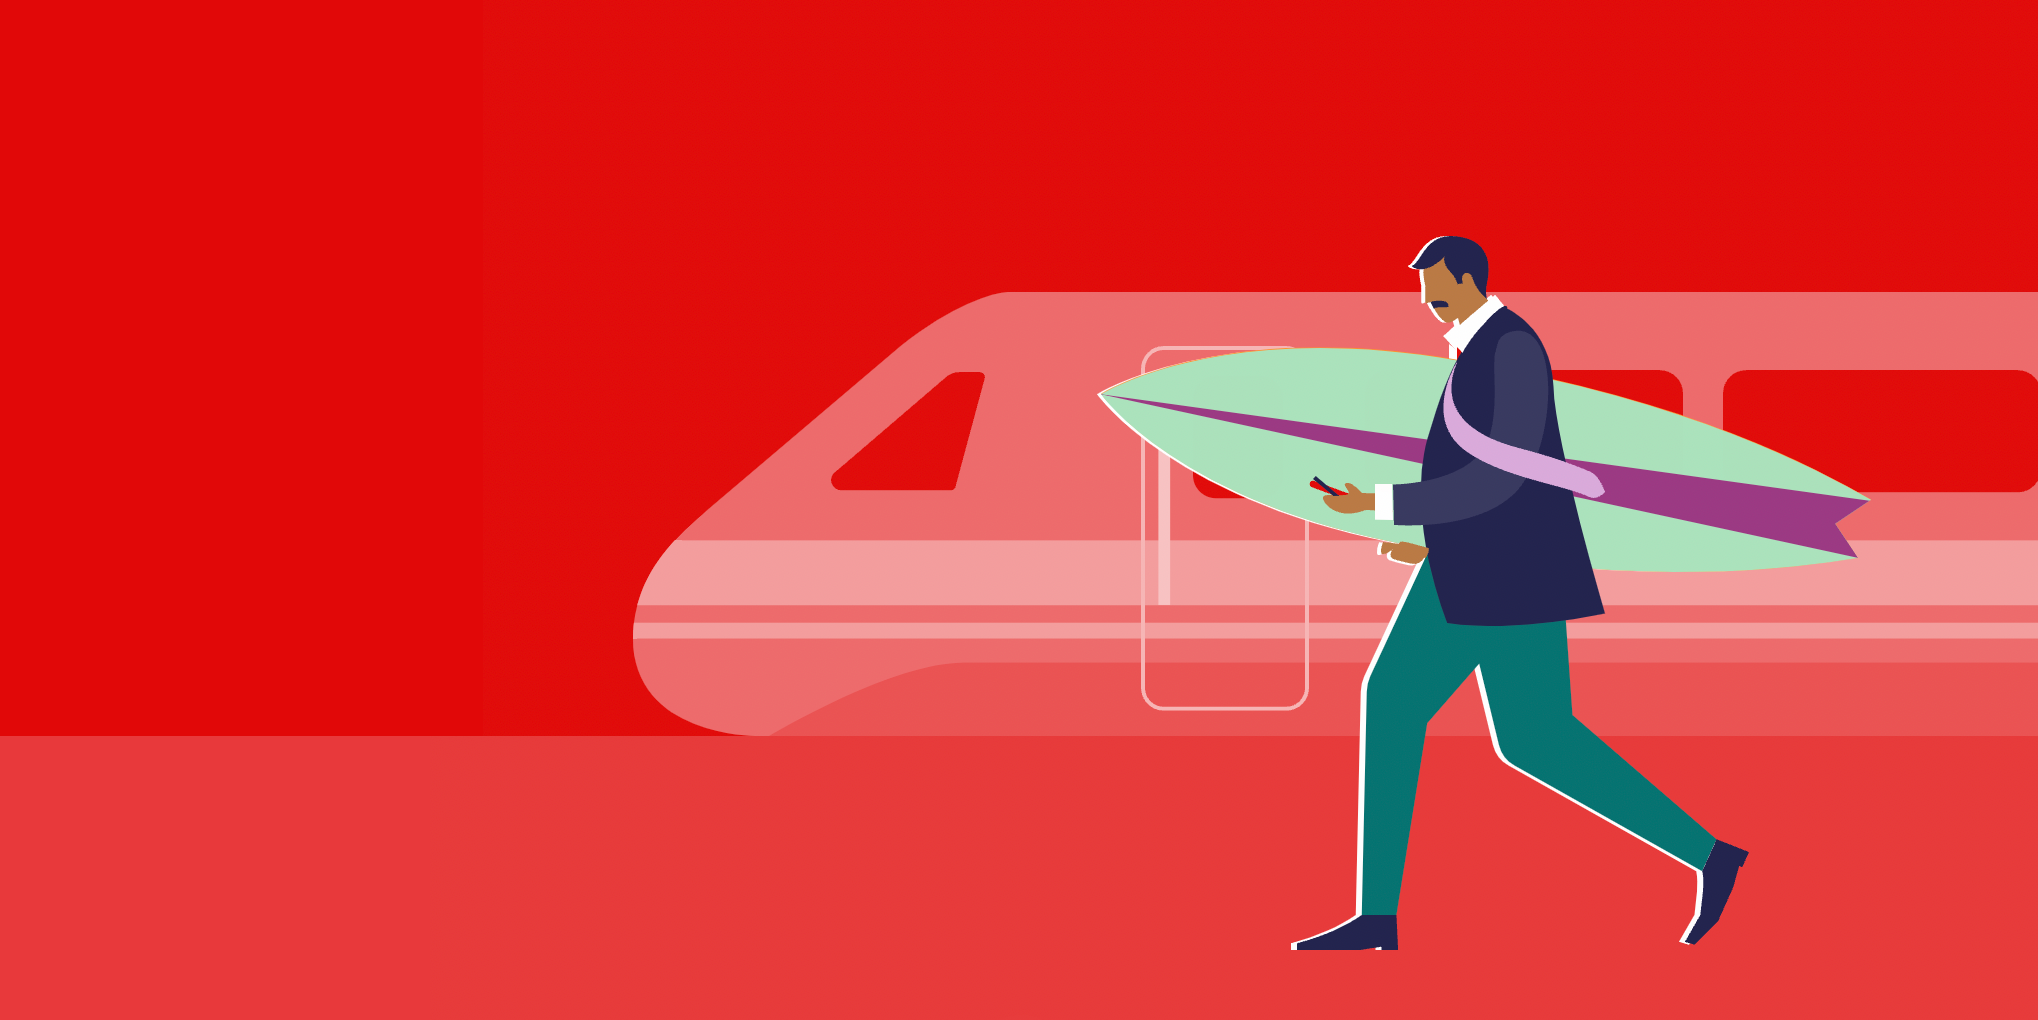 An illustration of a man carrying a surfboard in front of a train